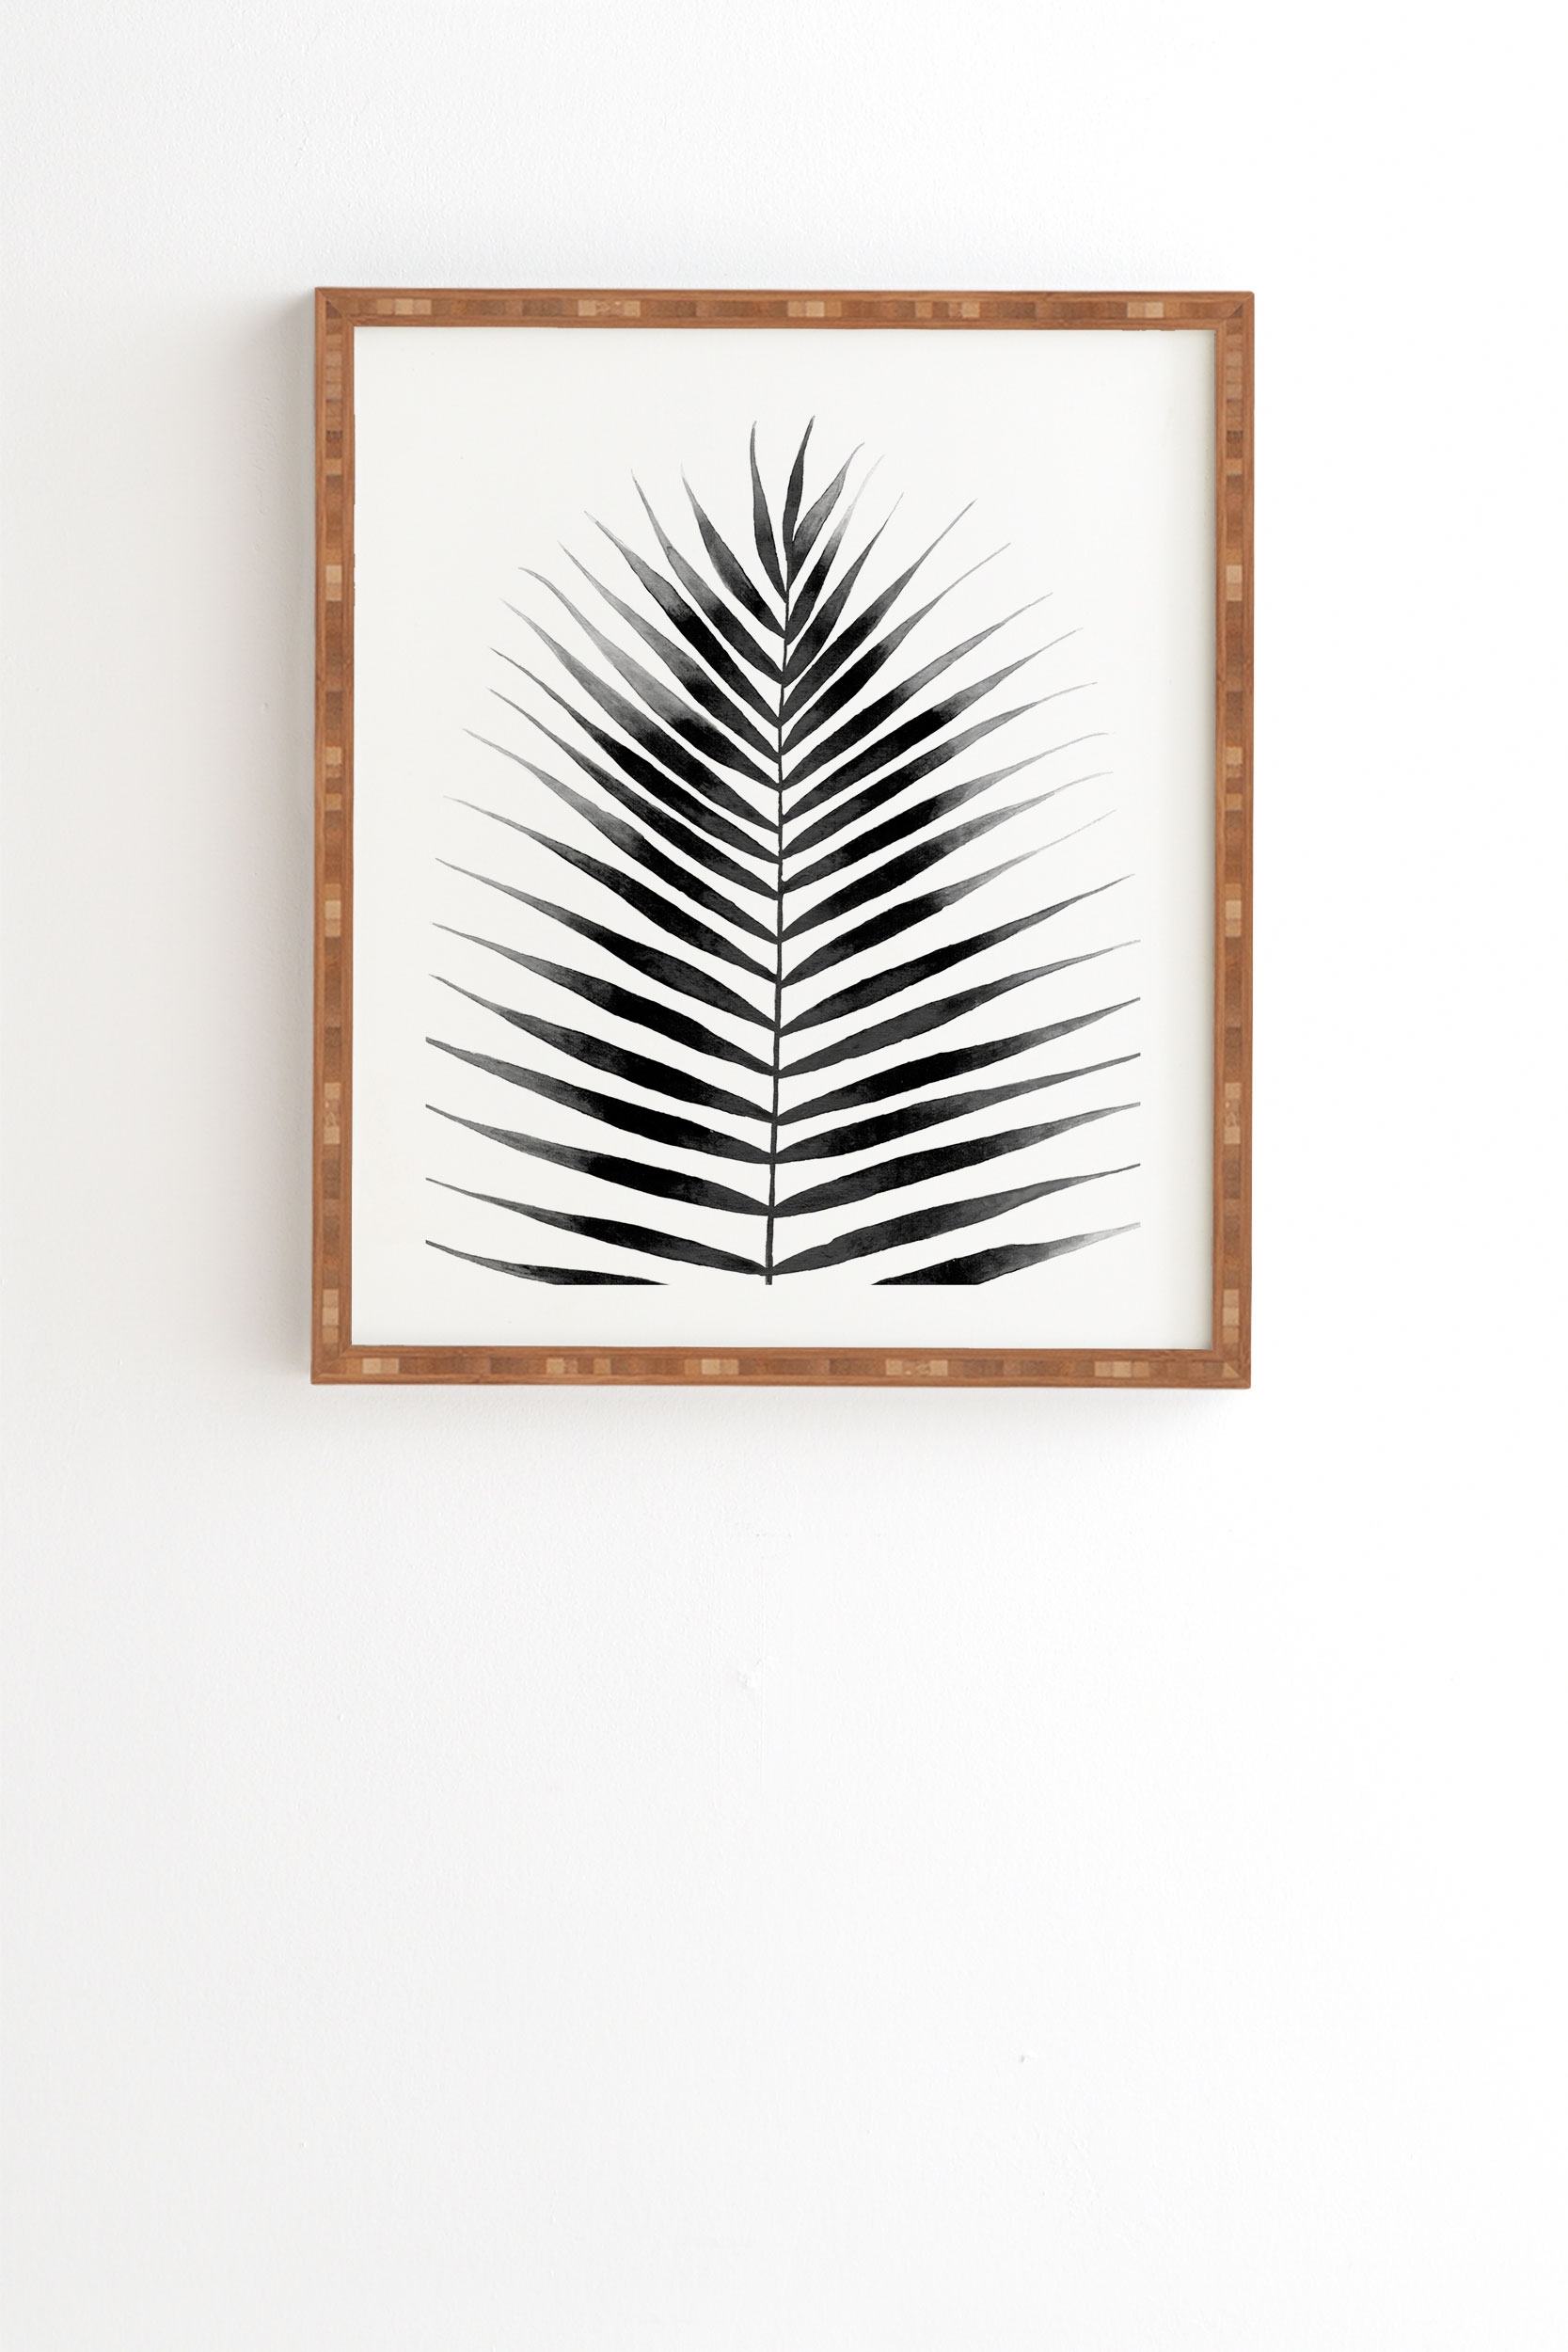 Palm Leaf Watercolor Black And White by Kris Kivu - Framed Wall Art Bamboo 20" x 20" - Image 1